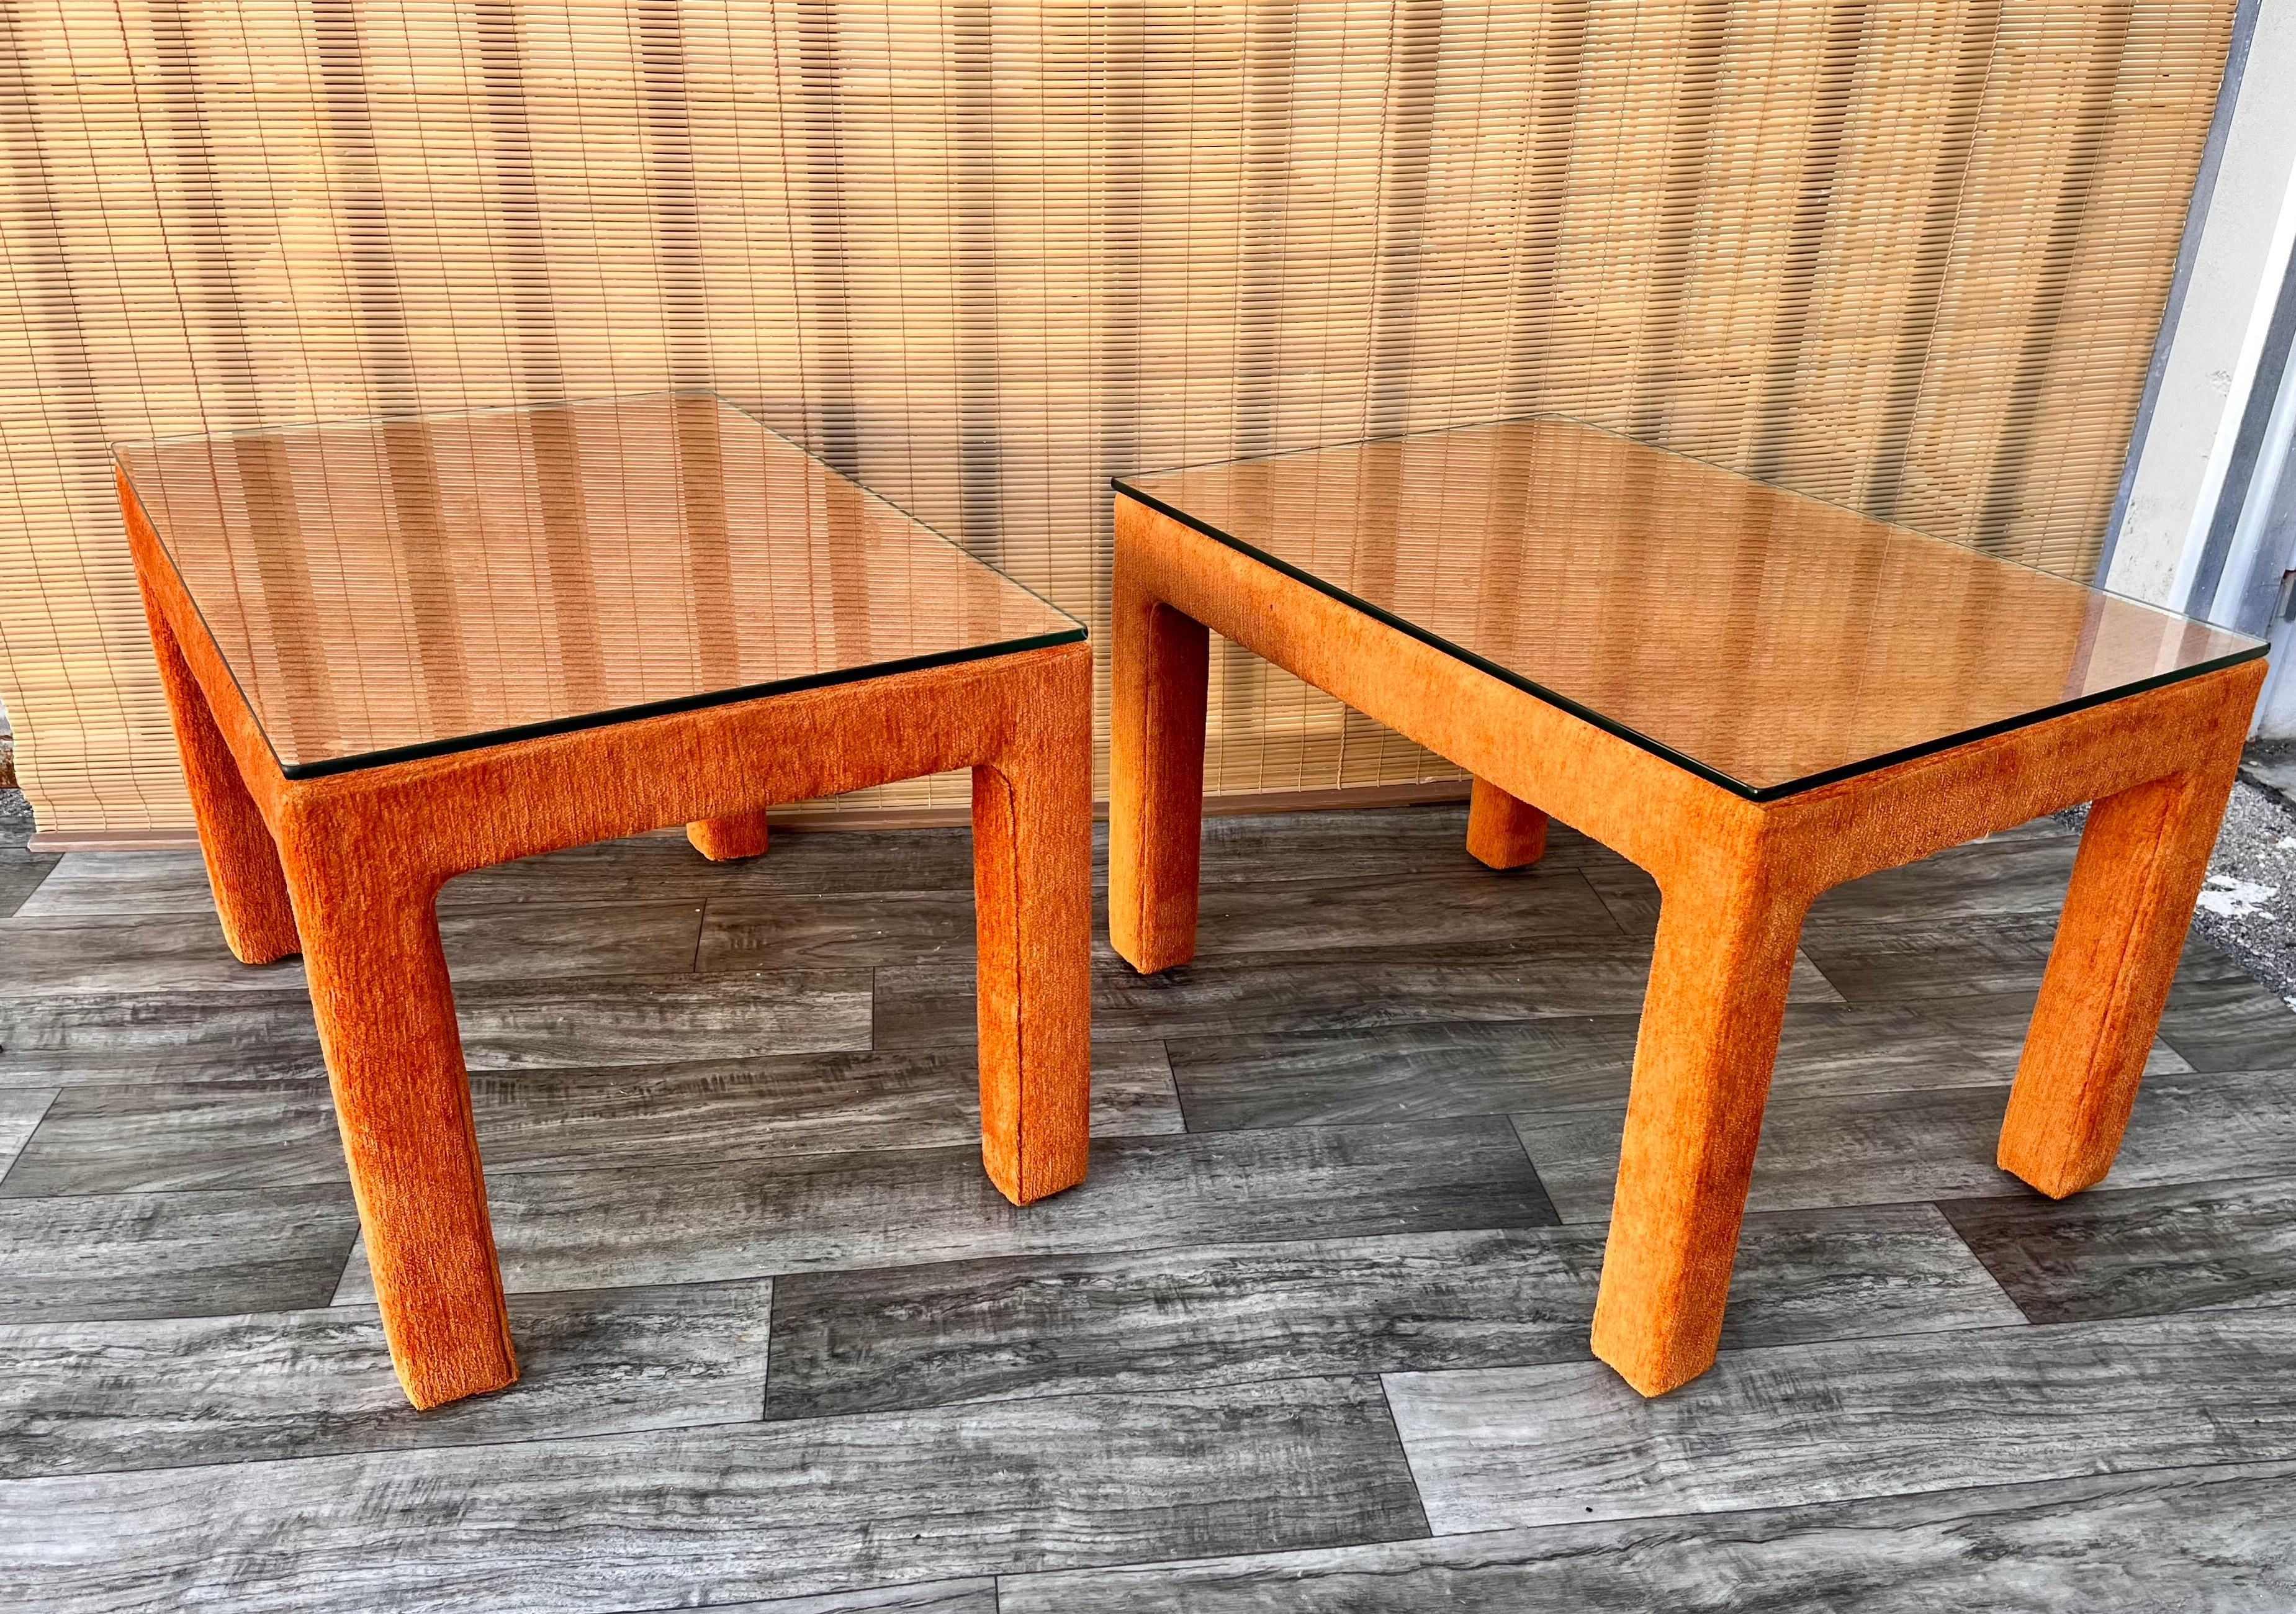 Pair of Mid-Century Modern Fully Upholstered Side Tables, circa 1970s For Sale 2